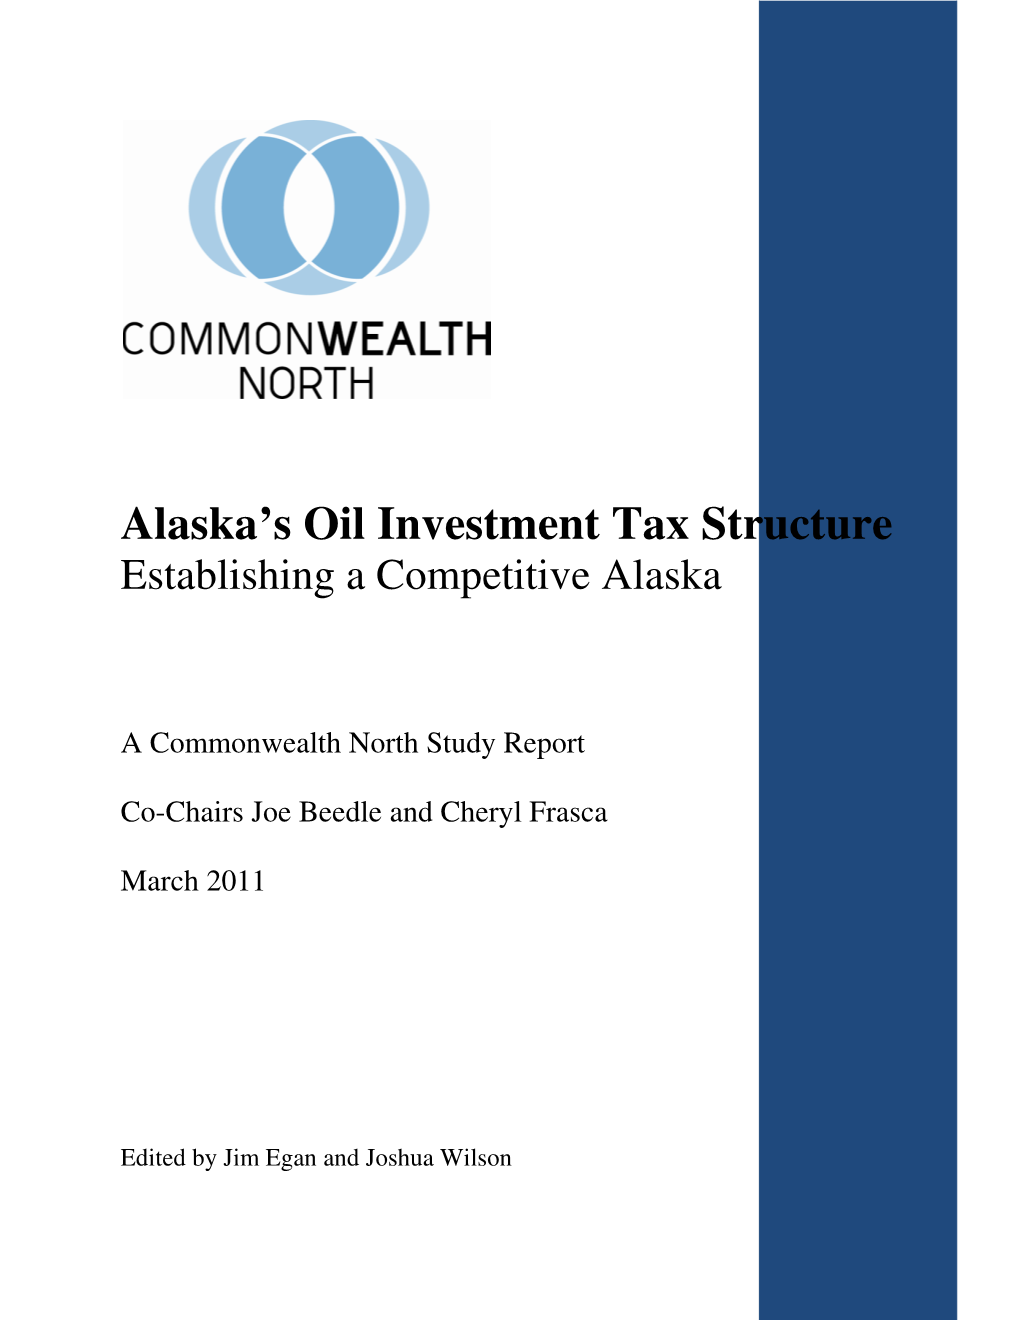 Alaska's Oil Investment Tax Structure